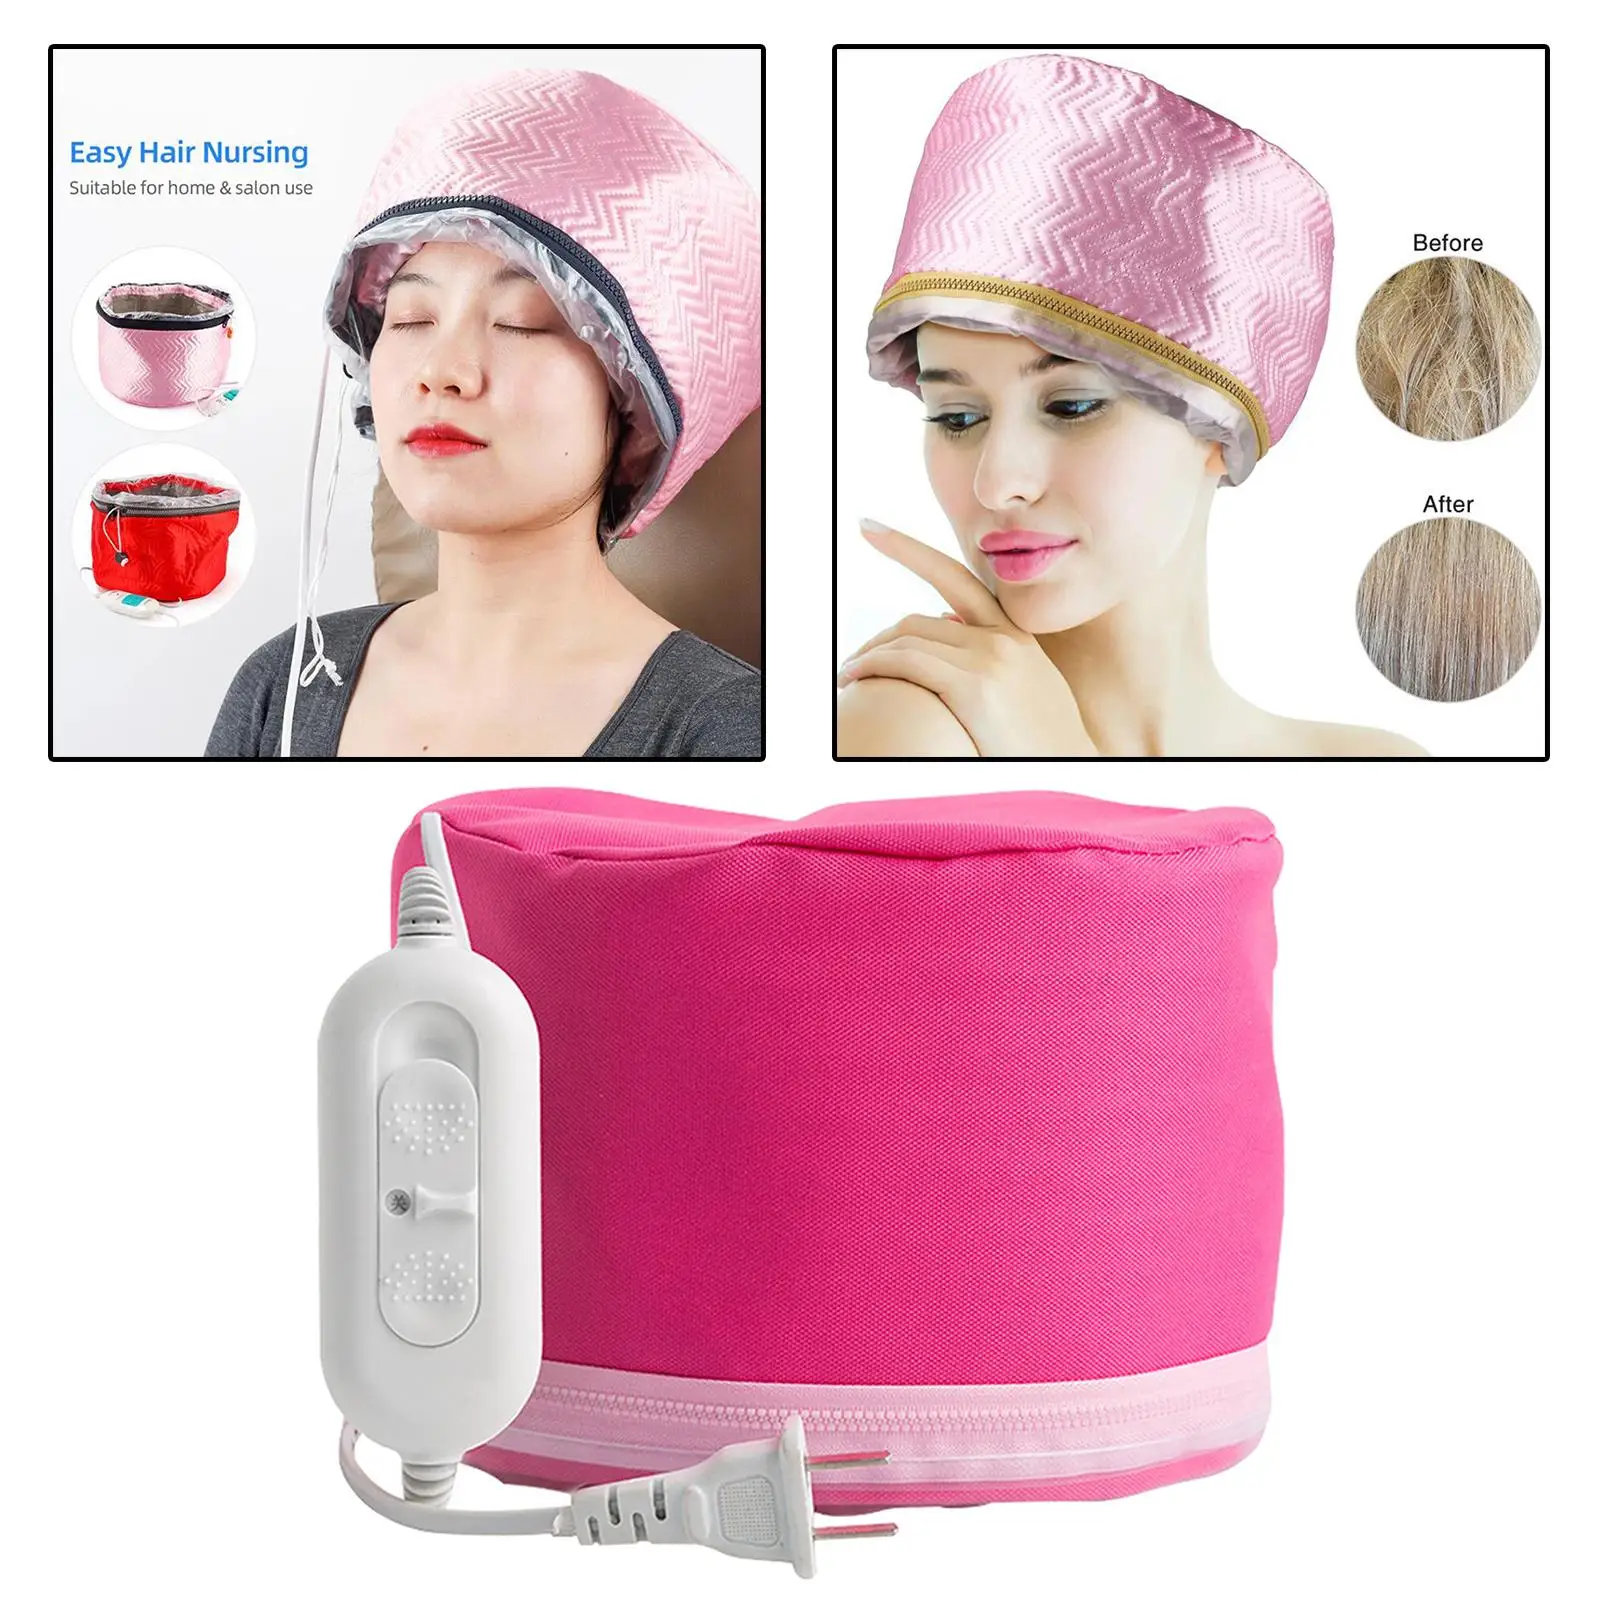 Hair Heating Caps Steamer Adjustable Thermal Heat Caps Microwave Hot Caps for Deep Conditioning Salon SPA Nursing Nourishing